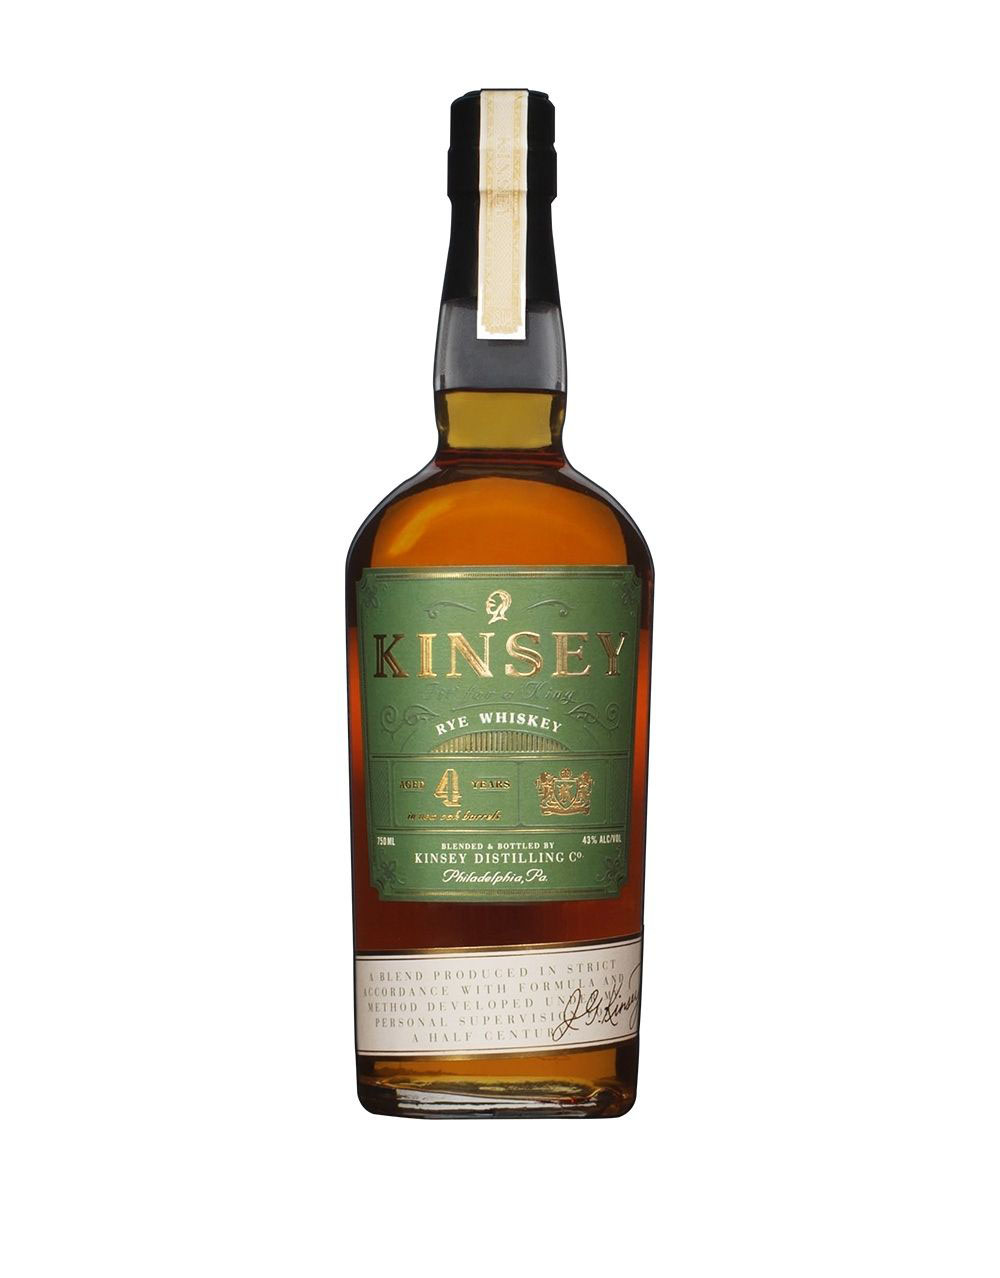 Kinsey 4 Year Old Rye